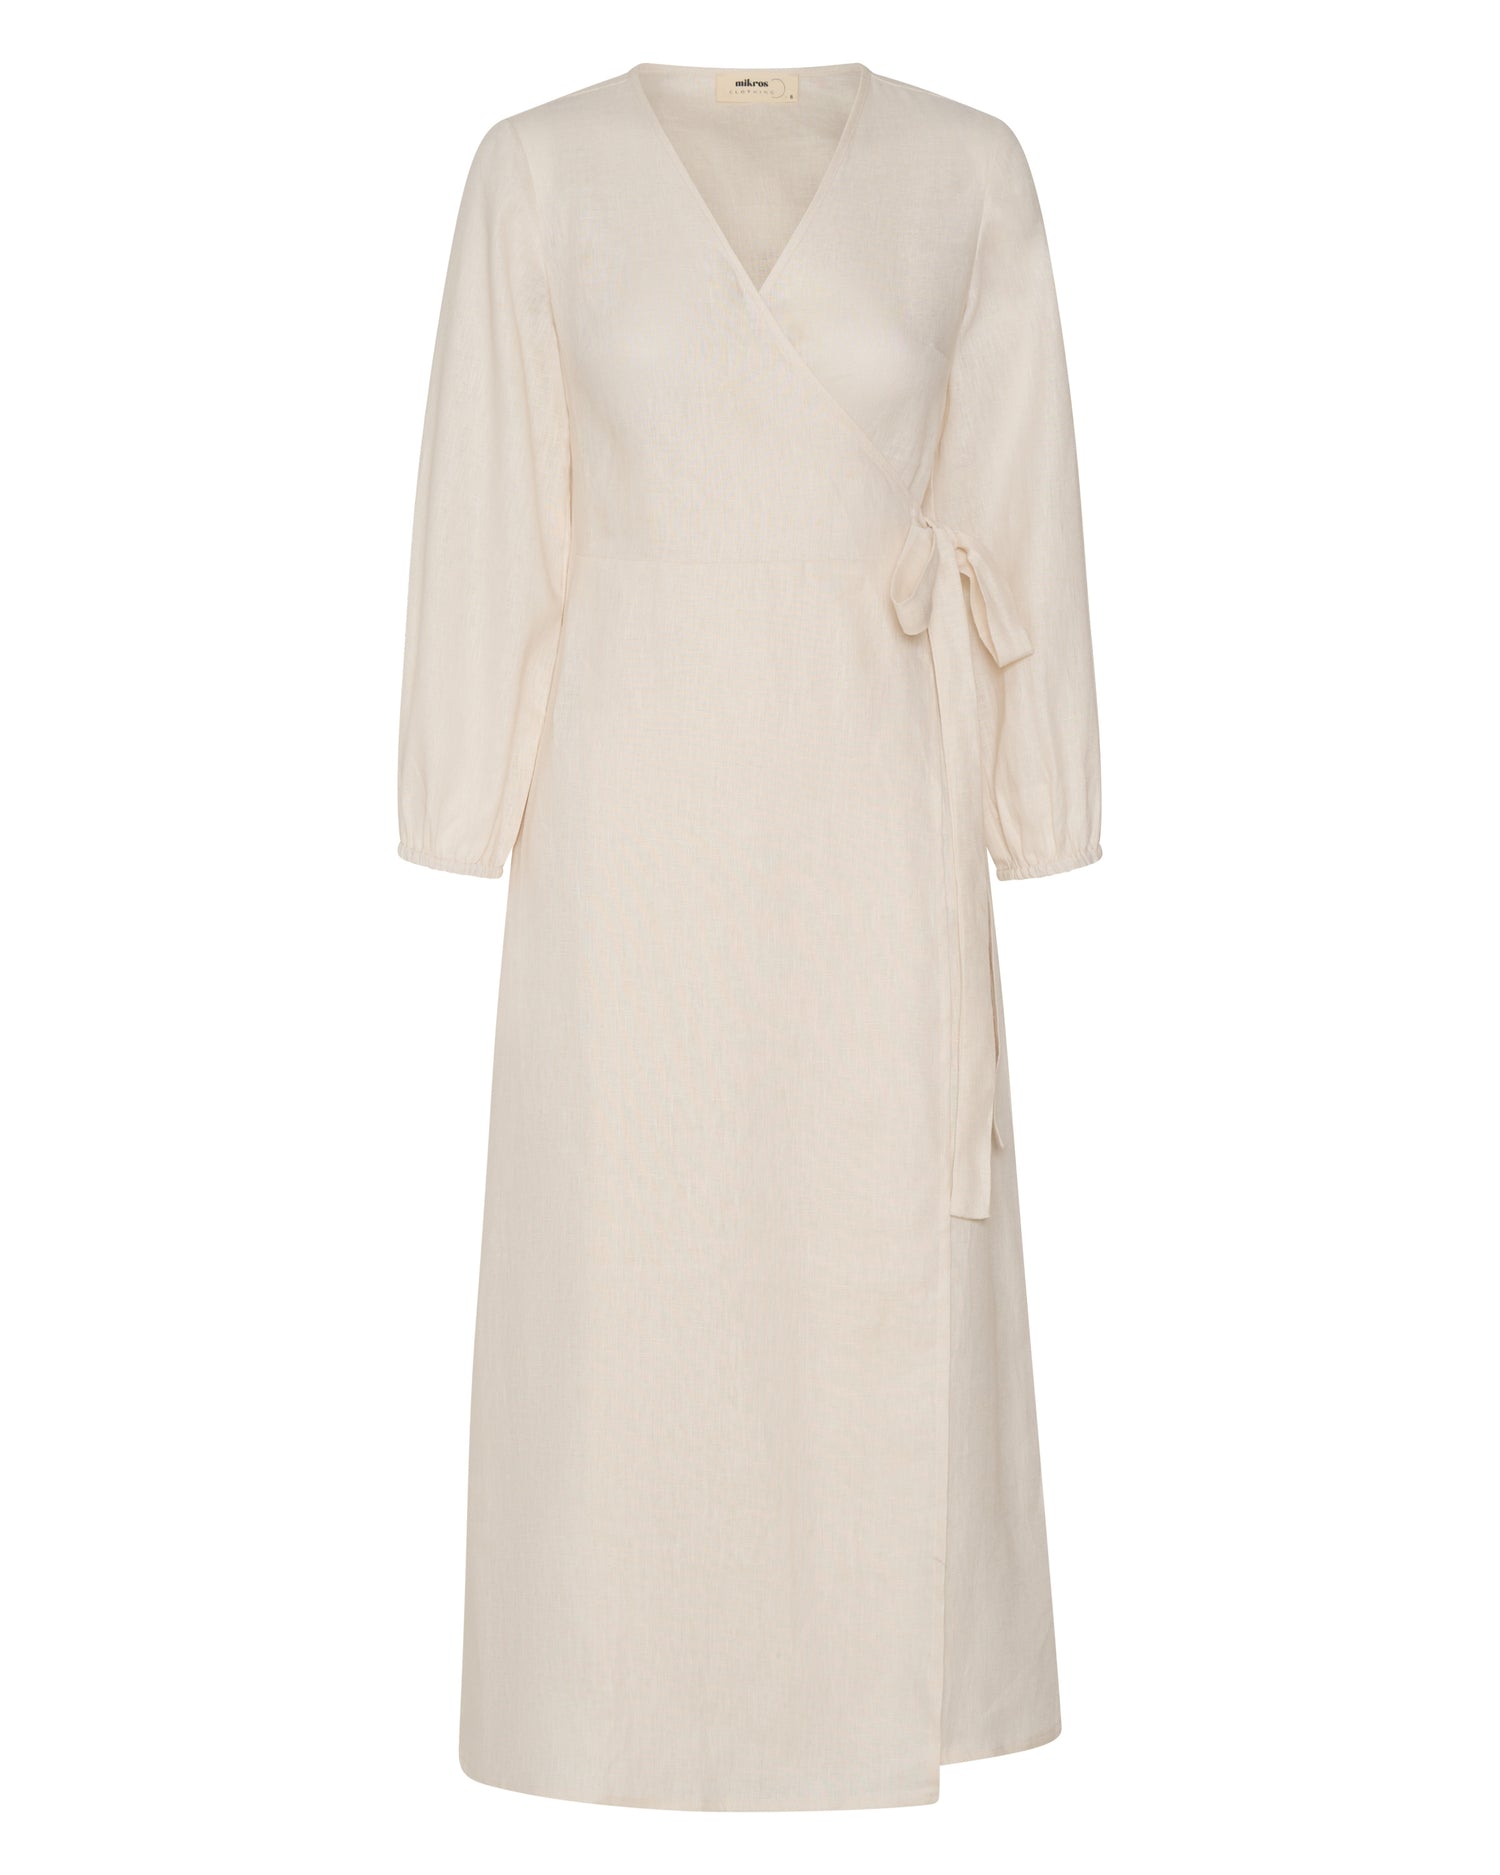 The front of a linen, off white wrap dress.